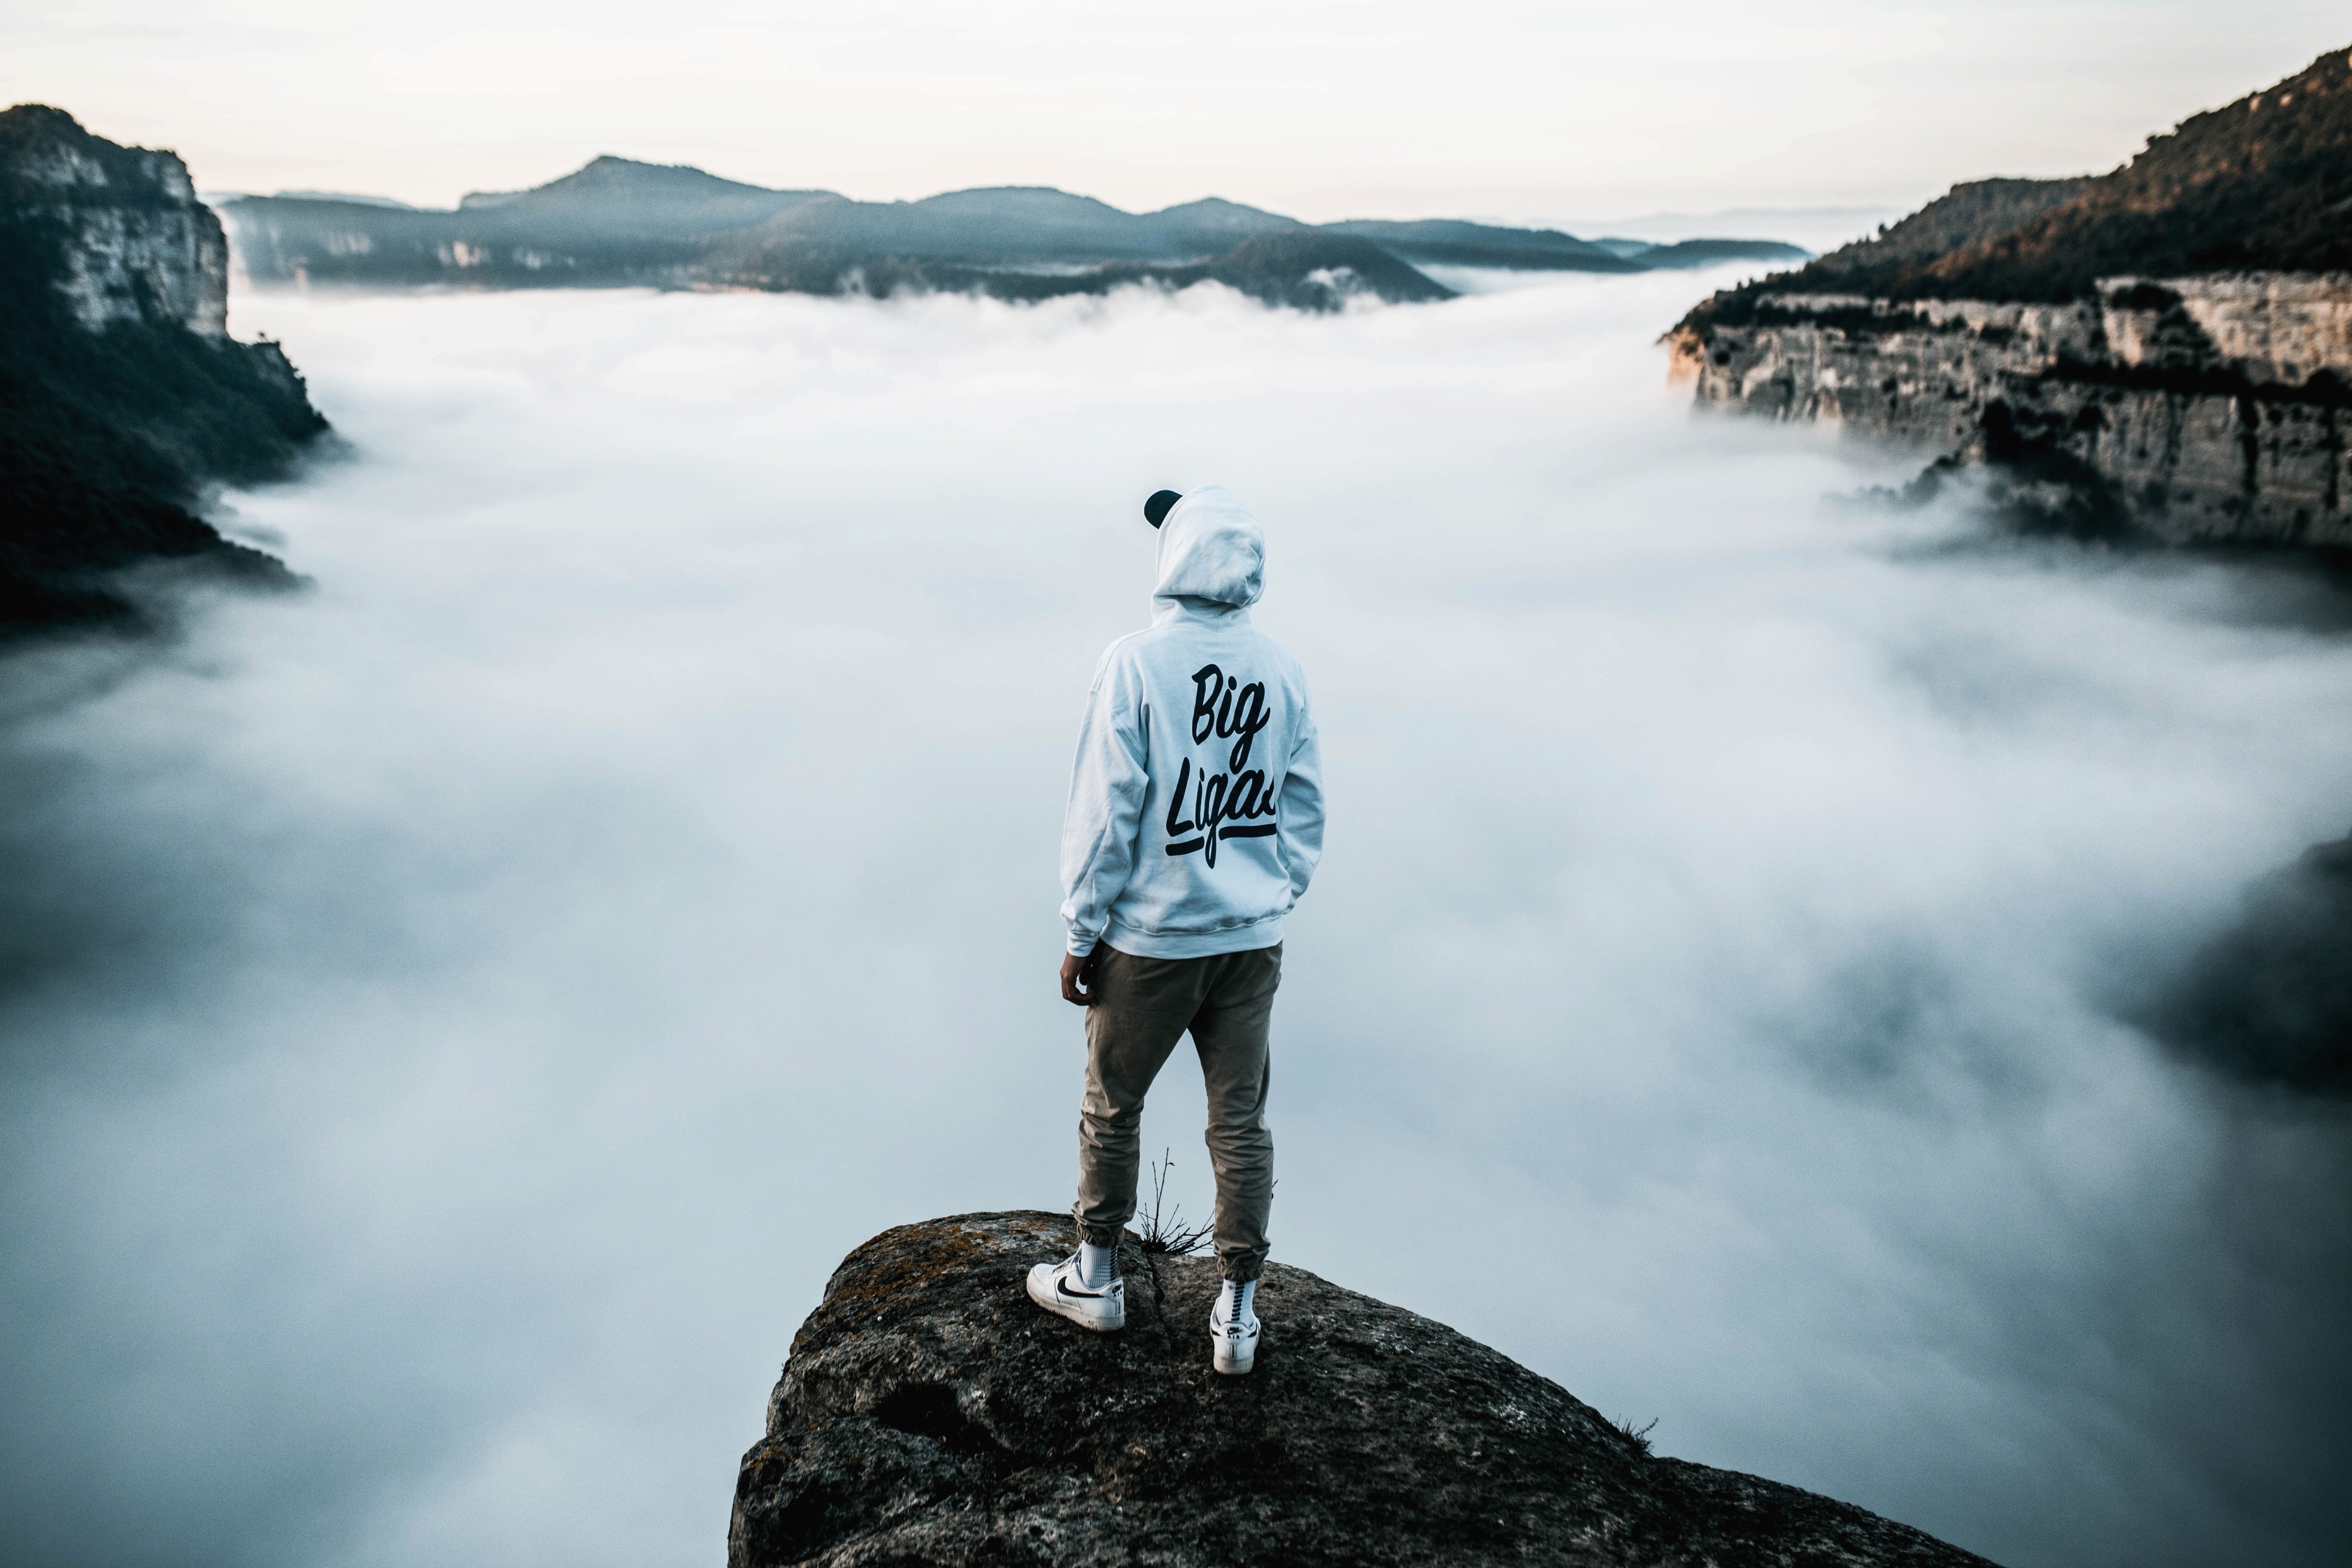 alone, loneliness, miscellaneous, miscellanea, sneakers, fog, cap, lonely UHD